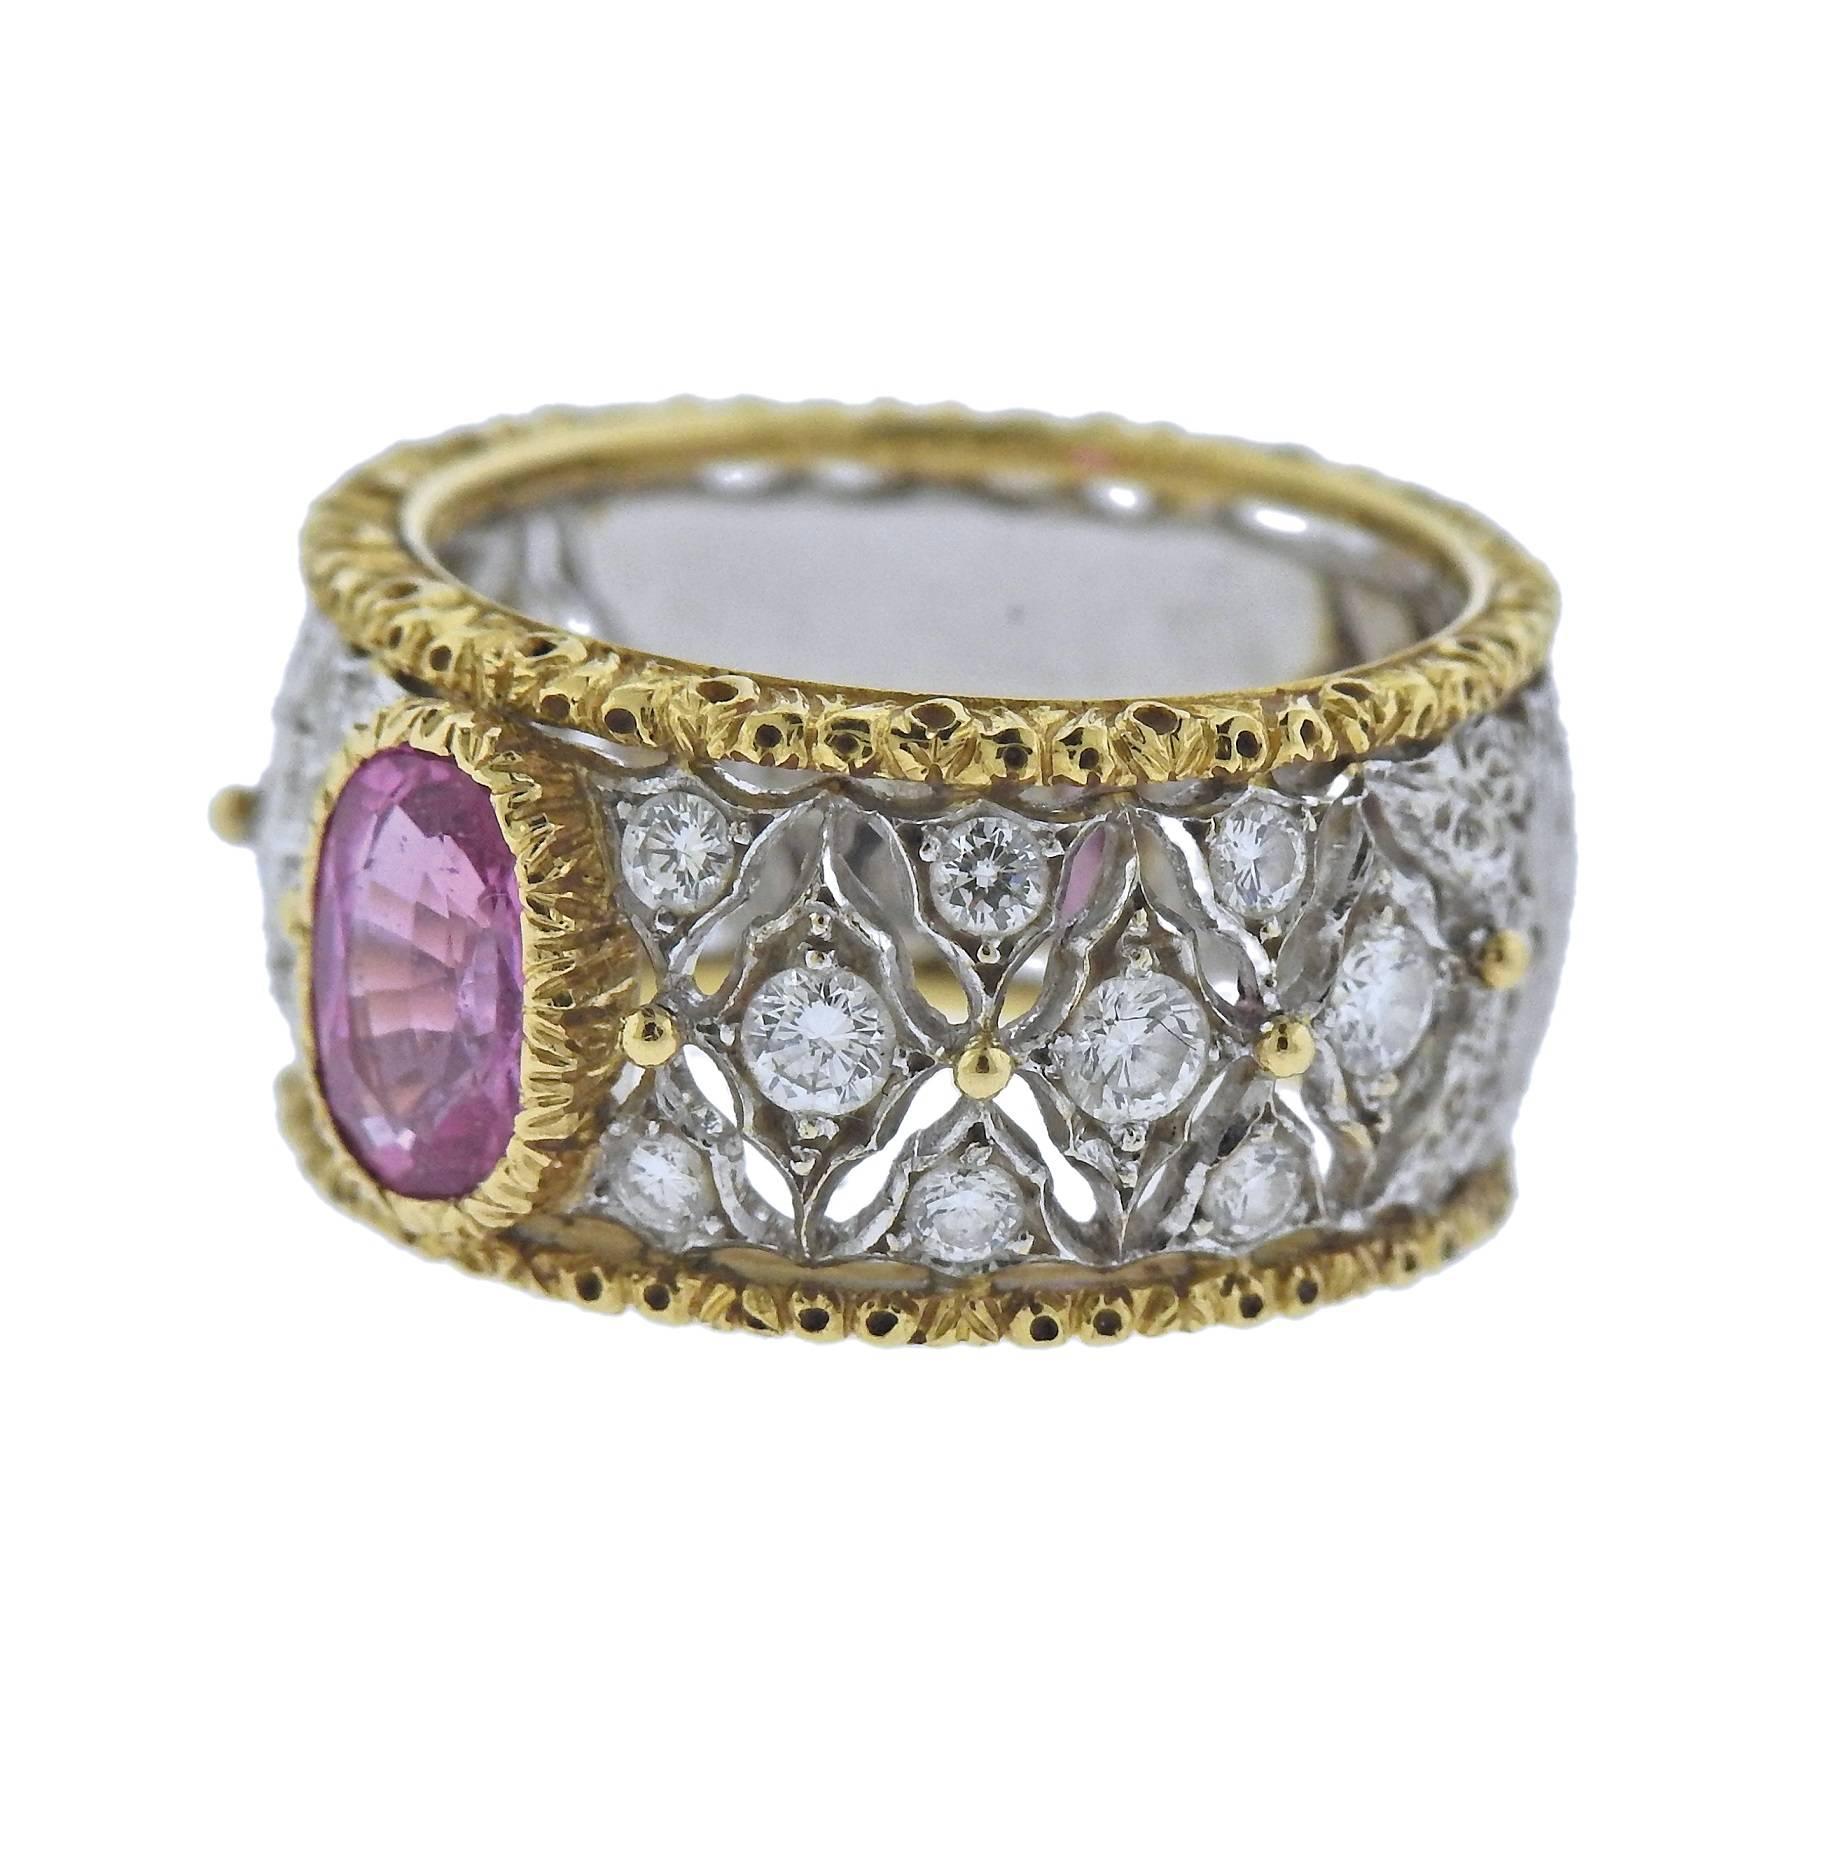 18k white and yellow gold band ring, crafted by Buccellati, featuring approx. 0.91ct oval pink sapphire, adorned with approx. 0.68ctw in H/VS diamonds. Ring size - 5.75, ring is 10.5mm wide, weighs 7.5 grams. Marked: Buccellati, Italy, 18k.